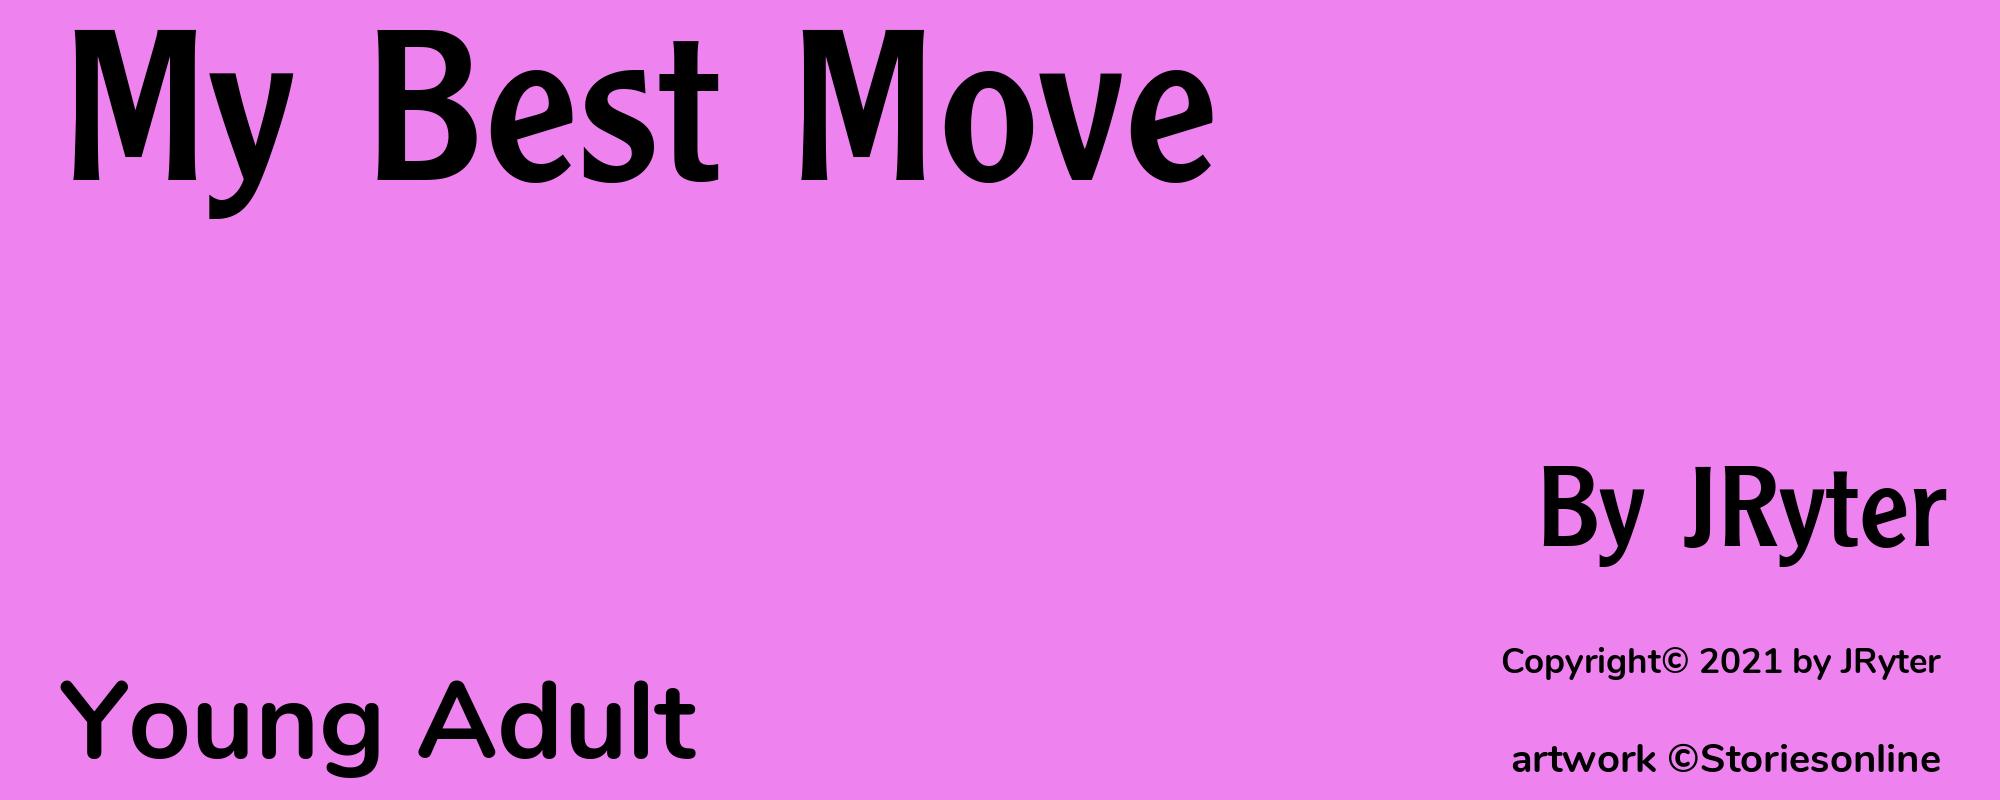 My Best Move - Cover